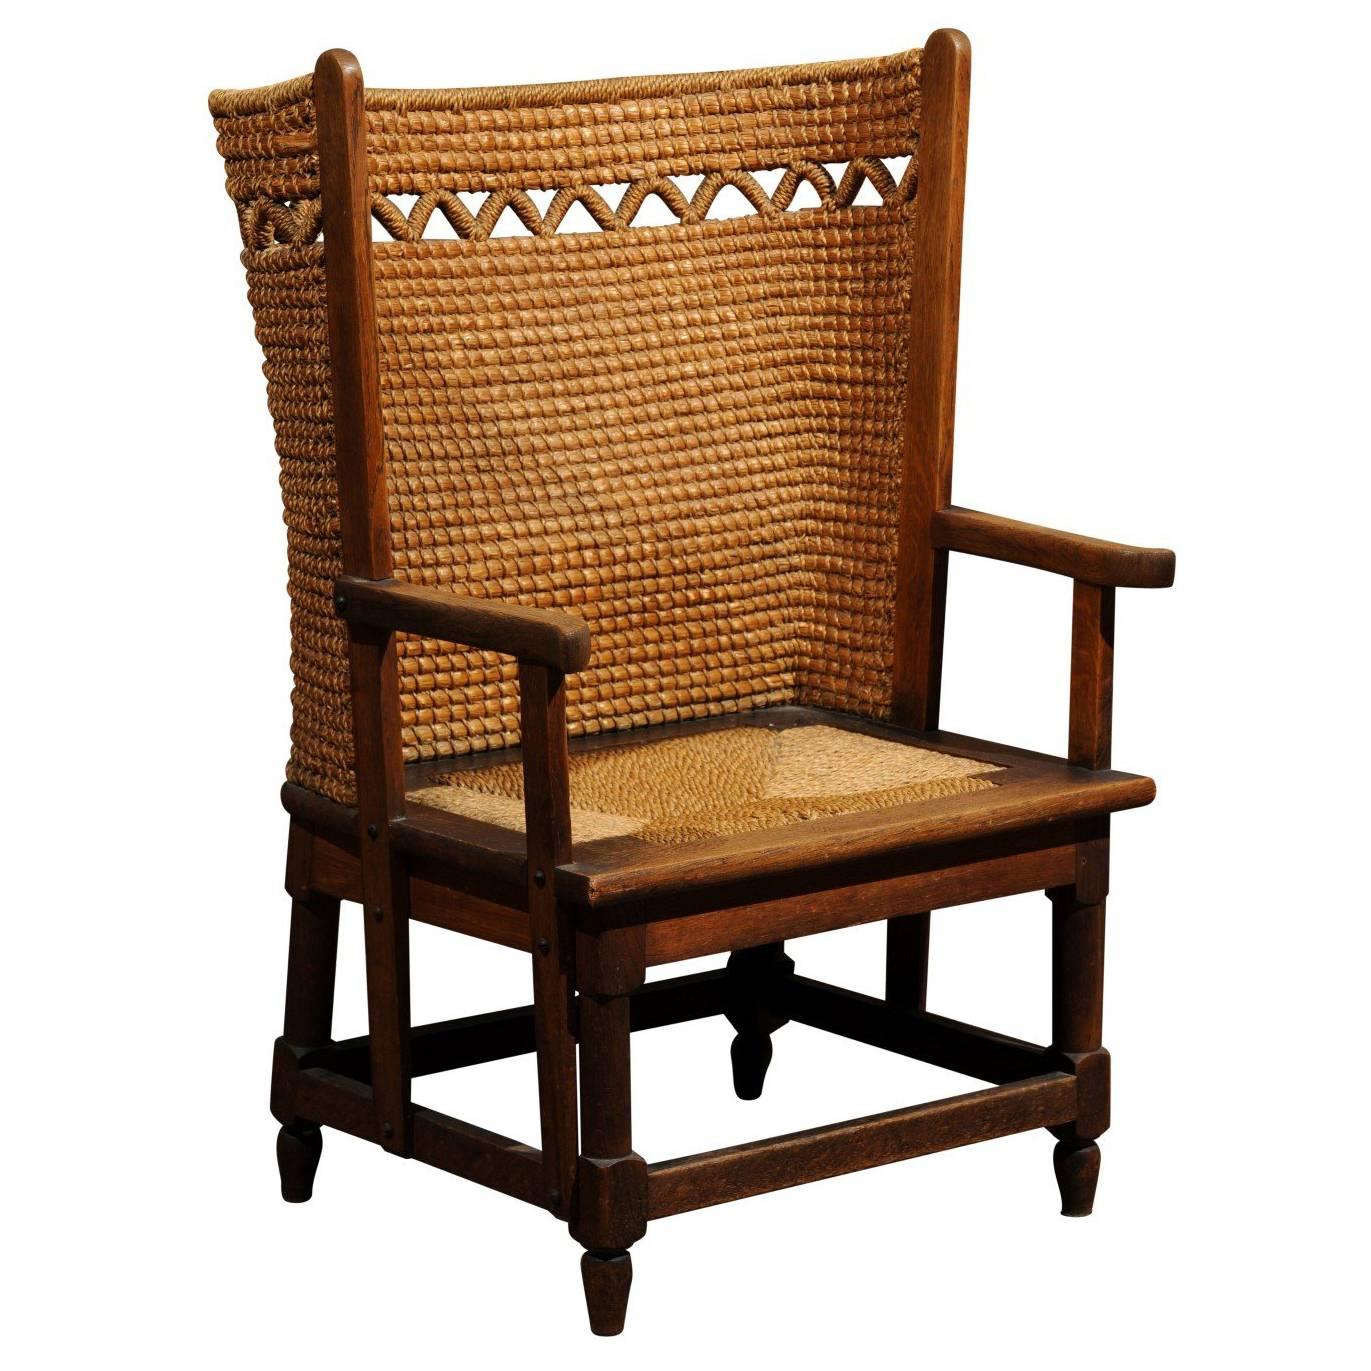 19th Century Scottish Orkney Chair with Handwoven Straw Back and Zigzag Patterns